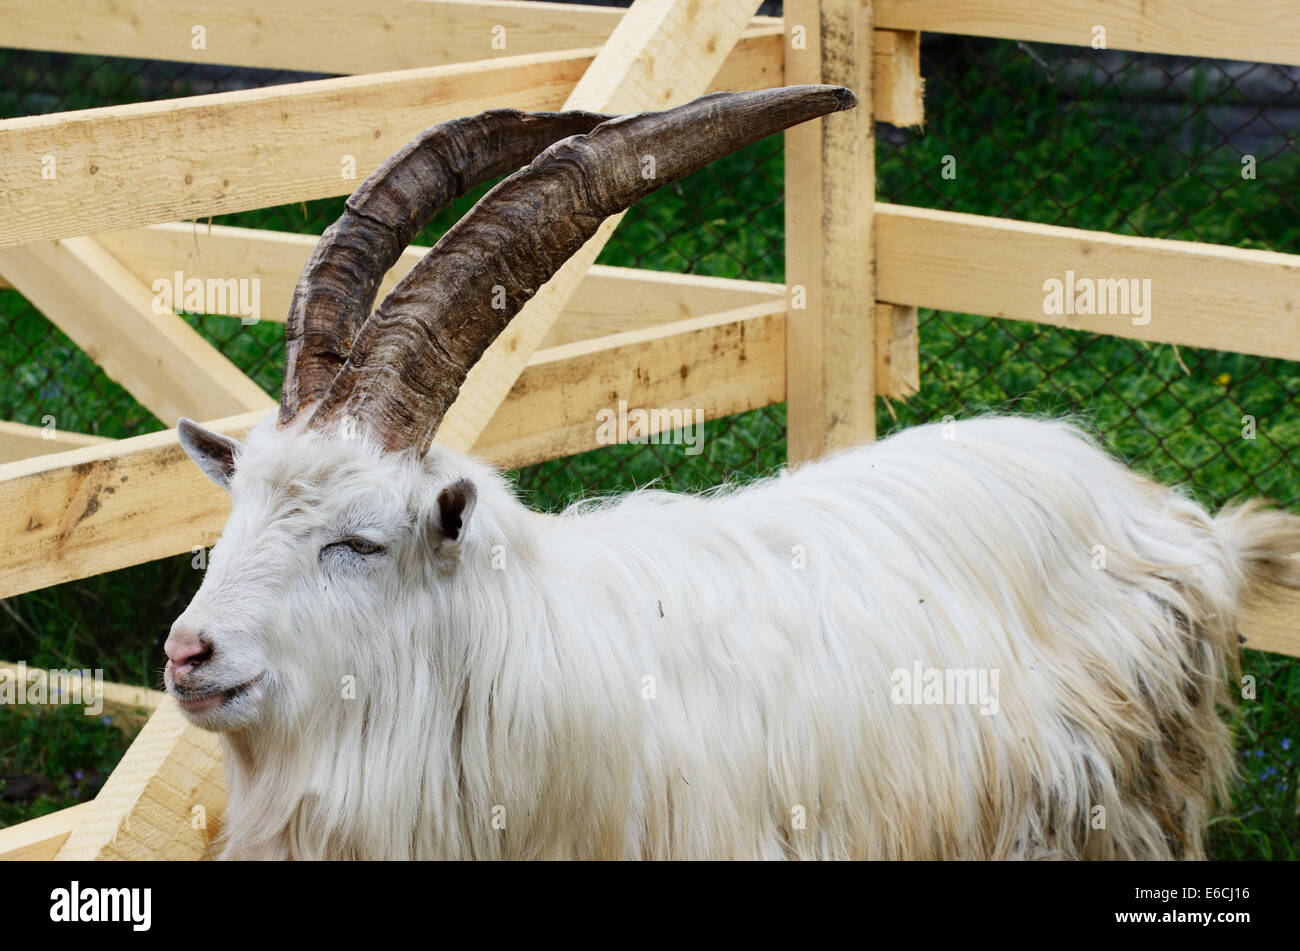 goat in a wooden pen, horizontal photo Stock Photo